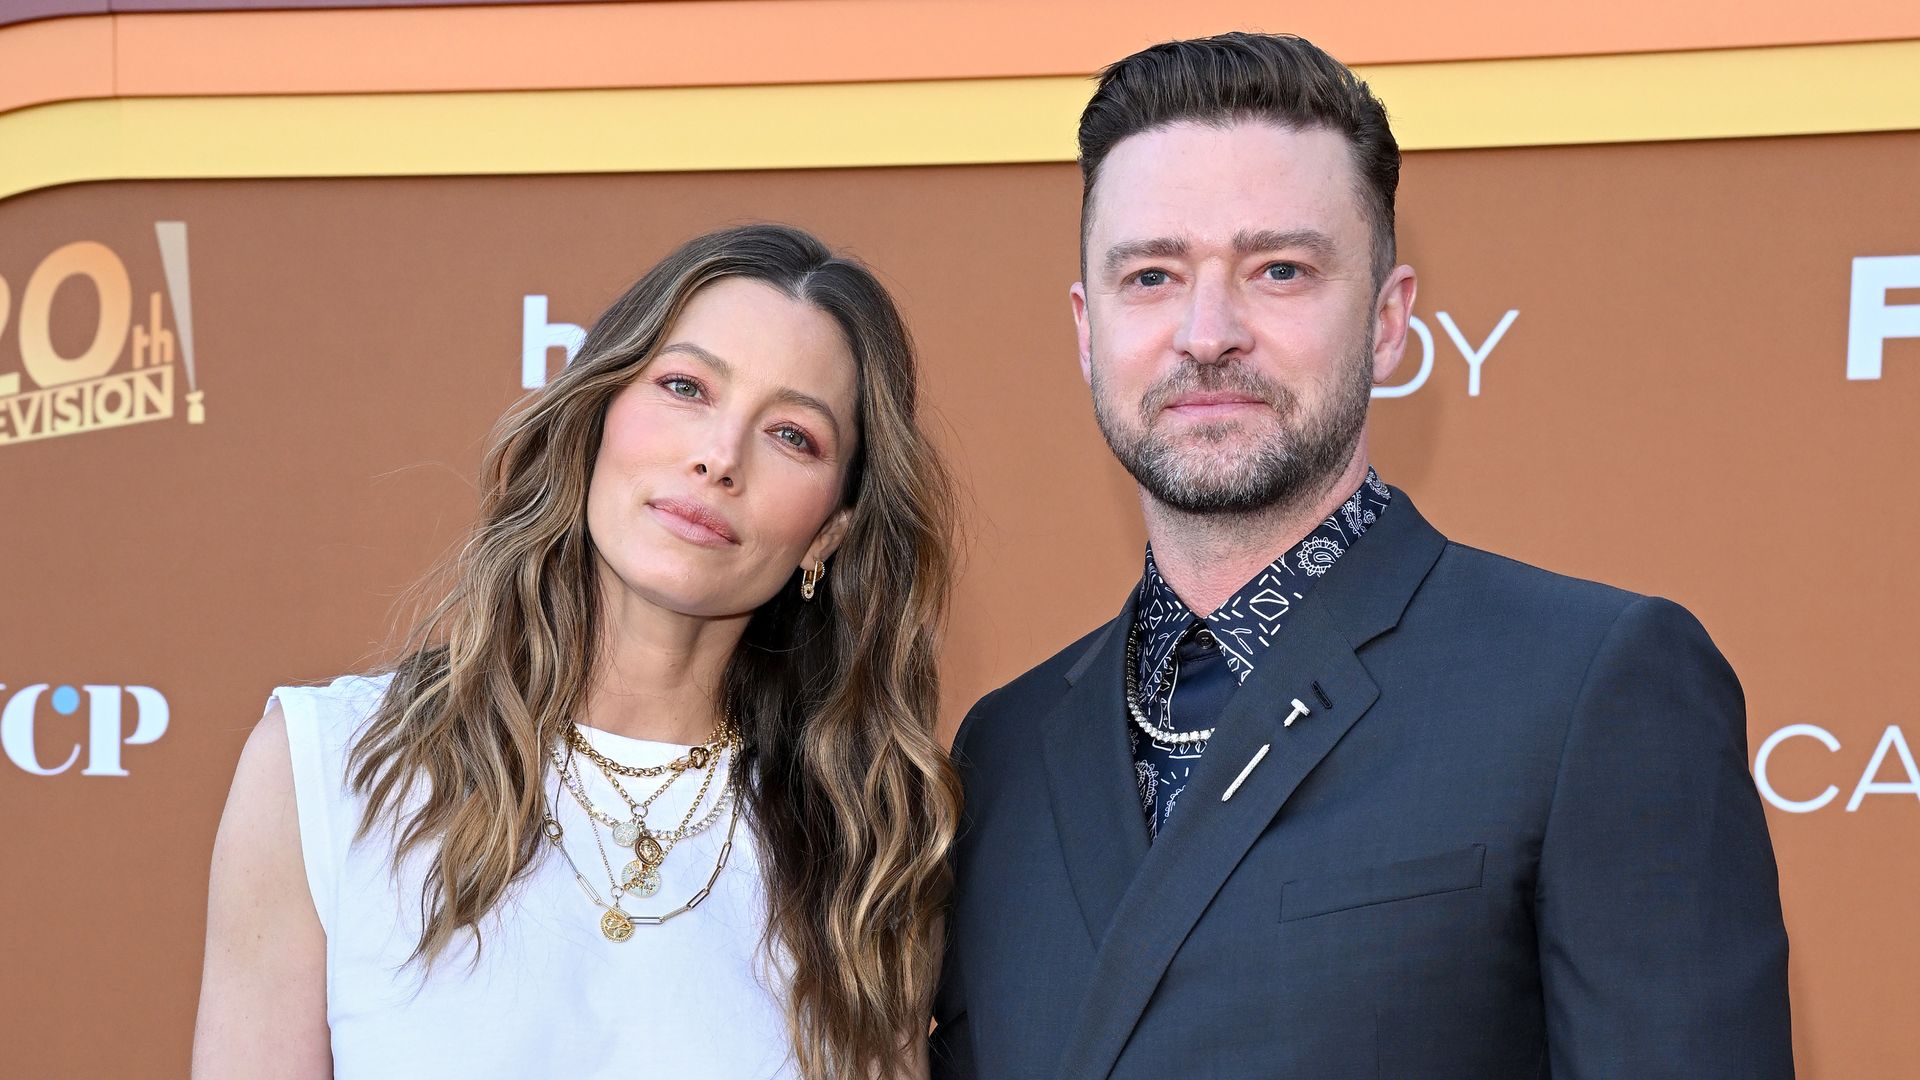 LOS ANGELES, CALIFORNIA - MAY 09: Jessica Biel and Justin Timberlake attend the Los Angeles Premiere FYC Event for Hulu's "Candy" at El Capitan Theatre on May 09, 2022 in Los Angeles, California. (Photo by Axelle/Bauer-Griffin/FilmMagic)